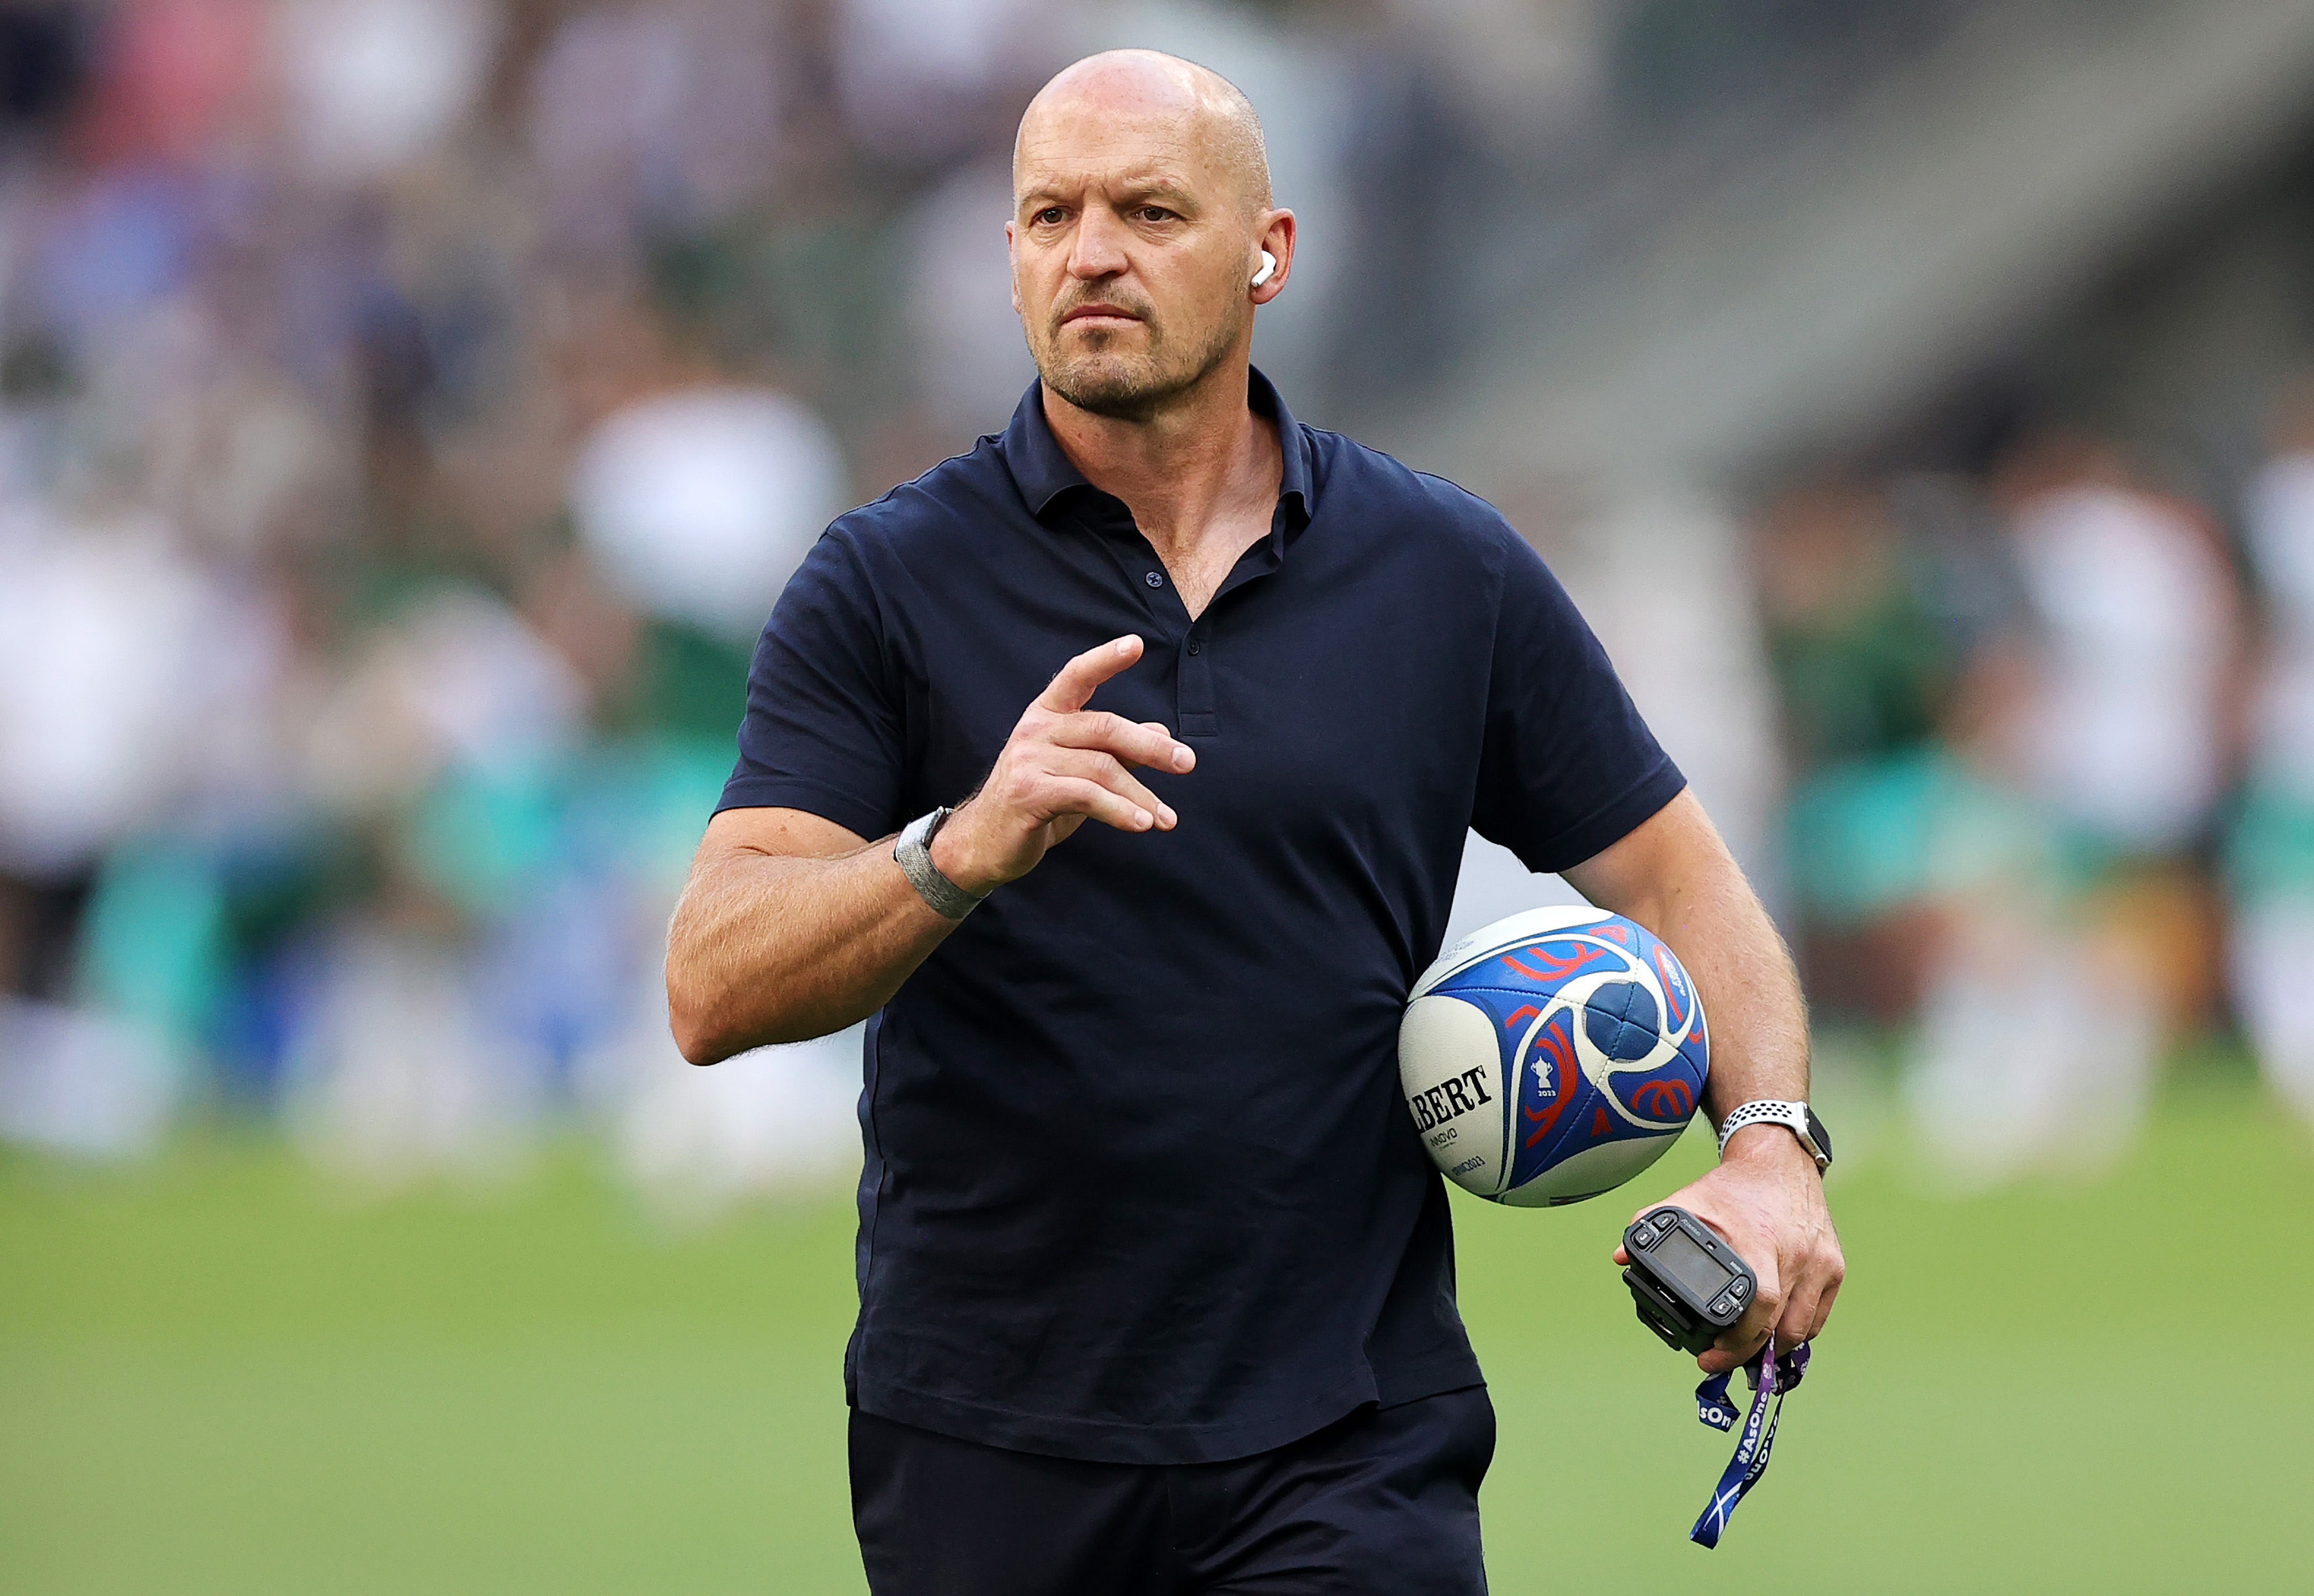 Gregor Townsend, Rugby world Cup